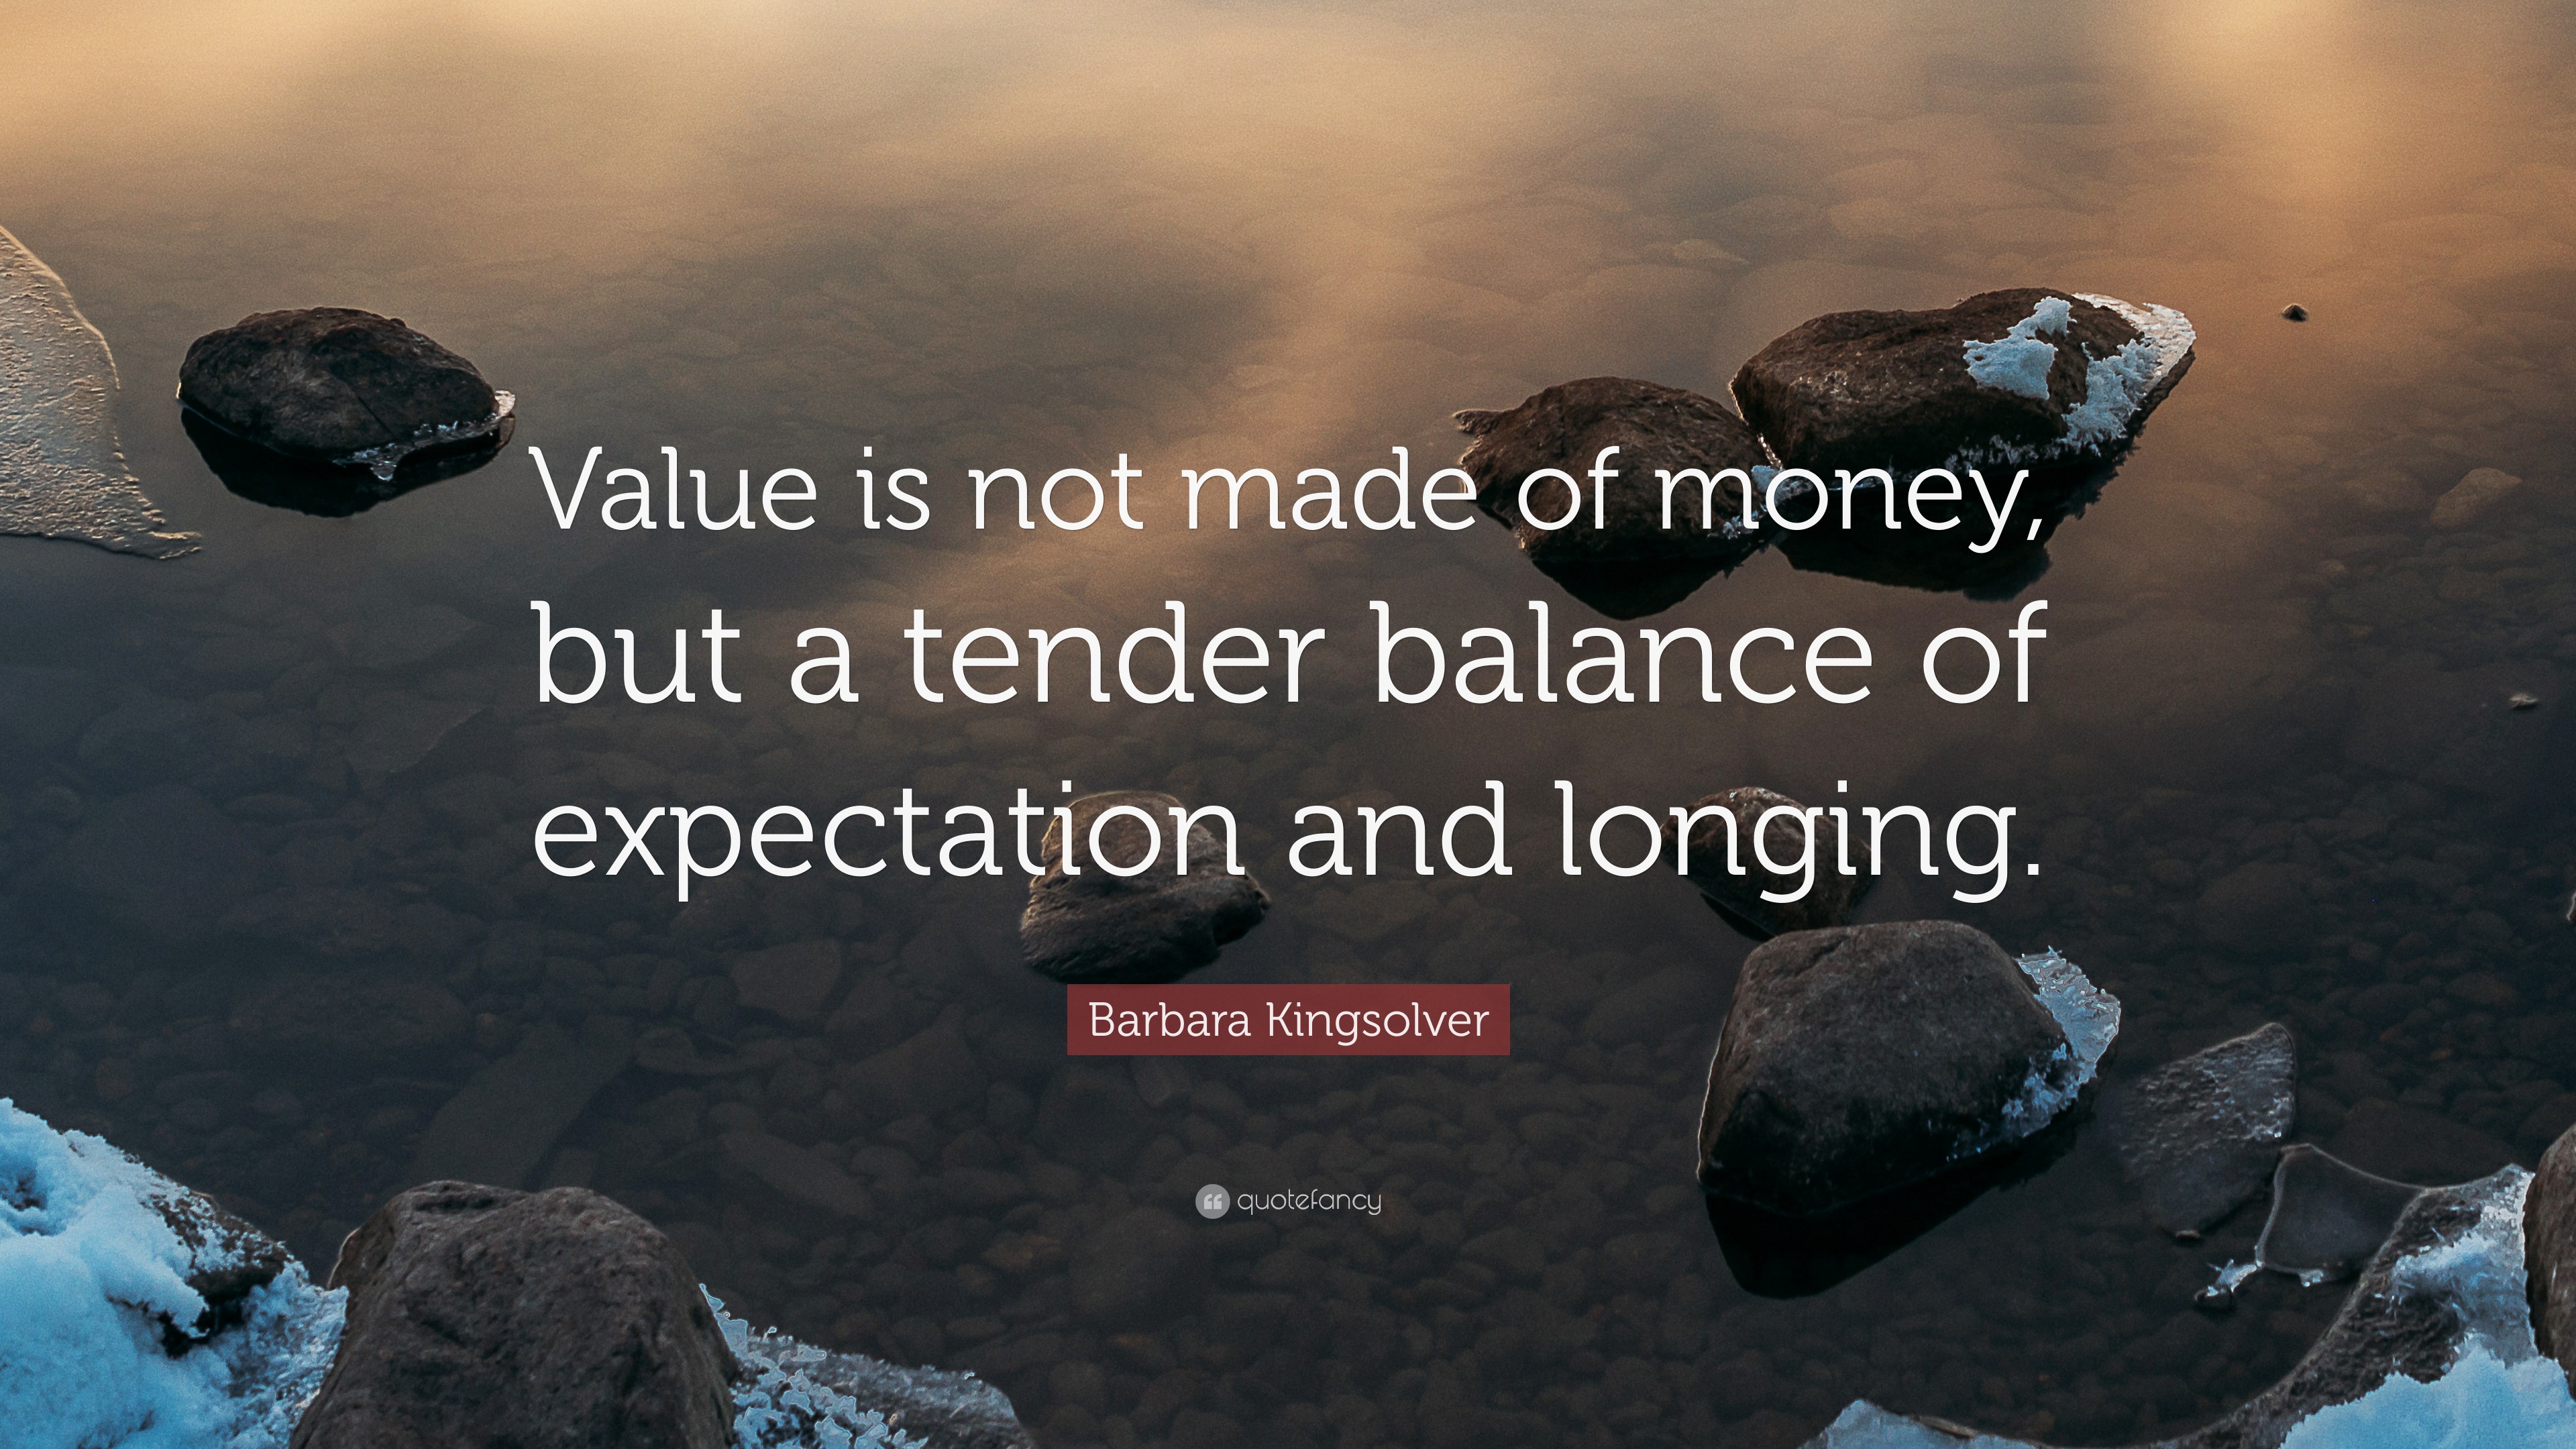 Value is not made of money, but a tender balance of expectation and longing...